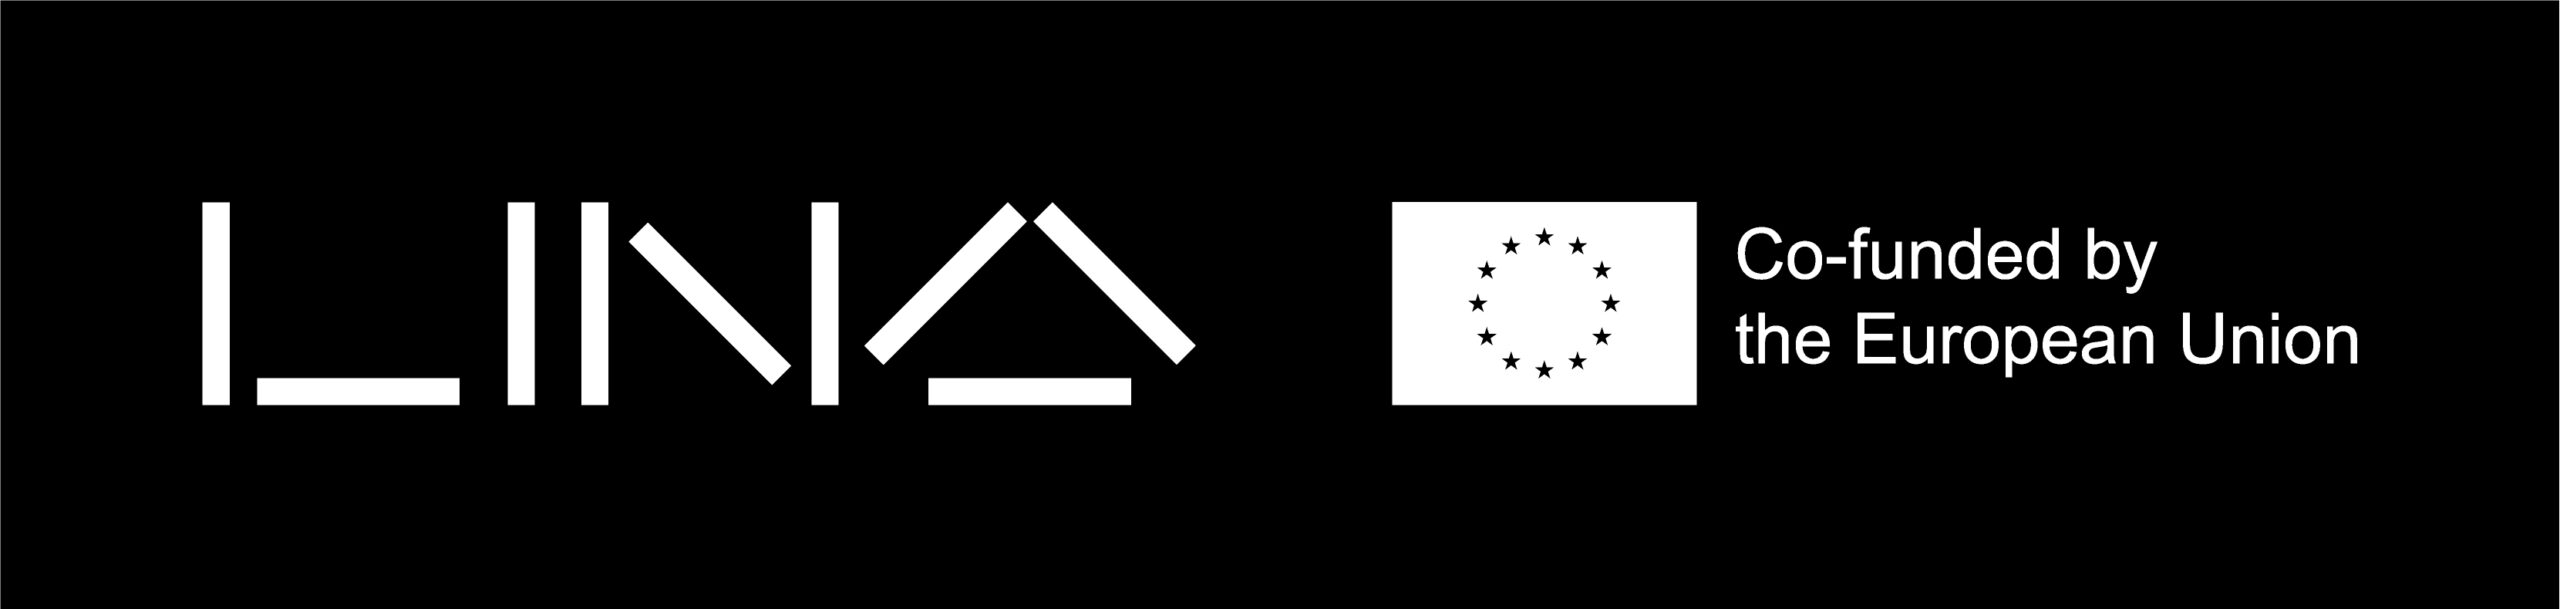 White on black logo: LINA Co-funded by the European Union